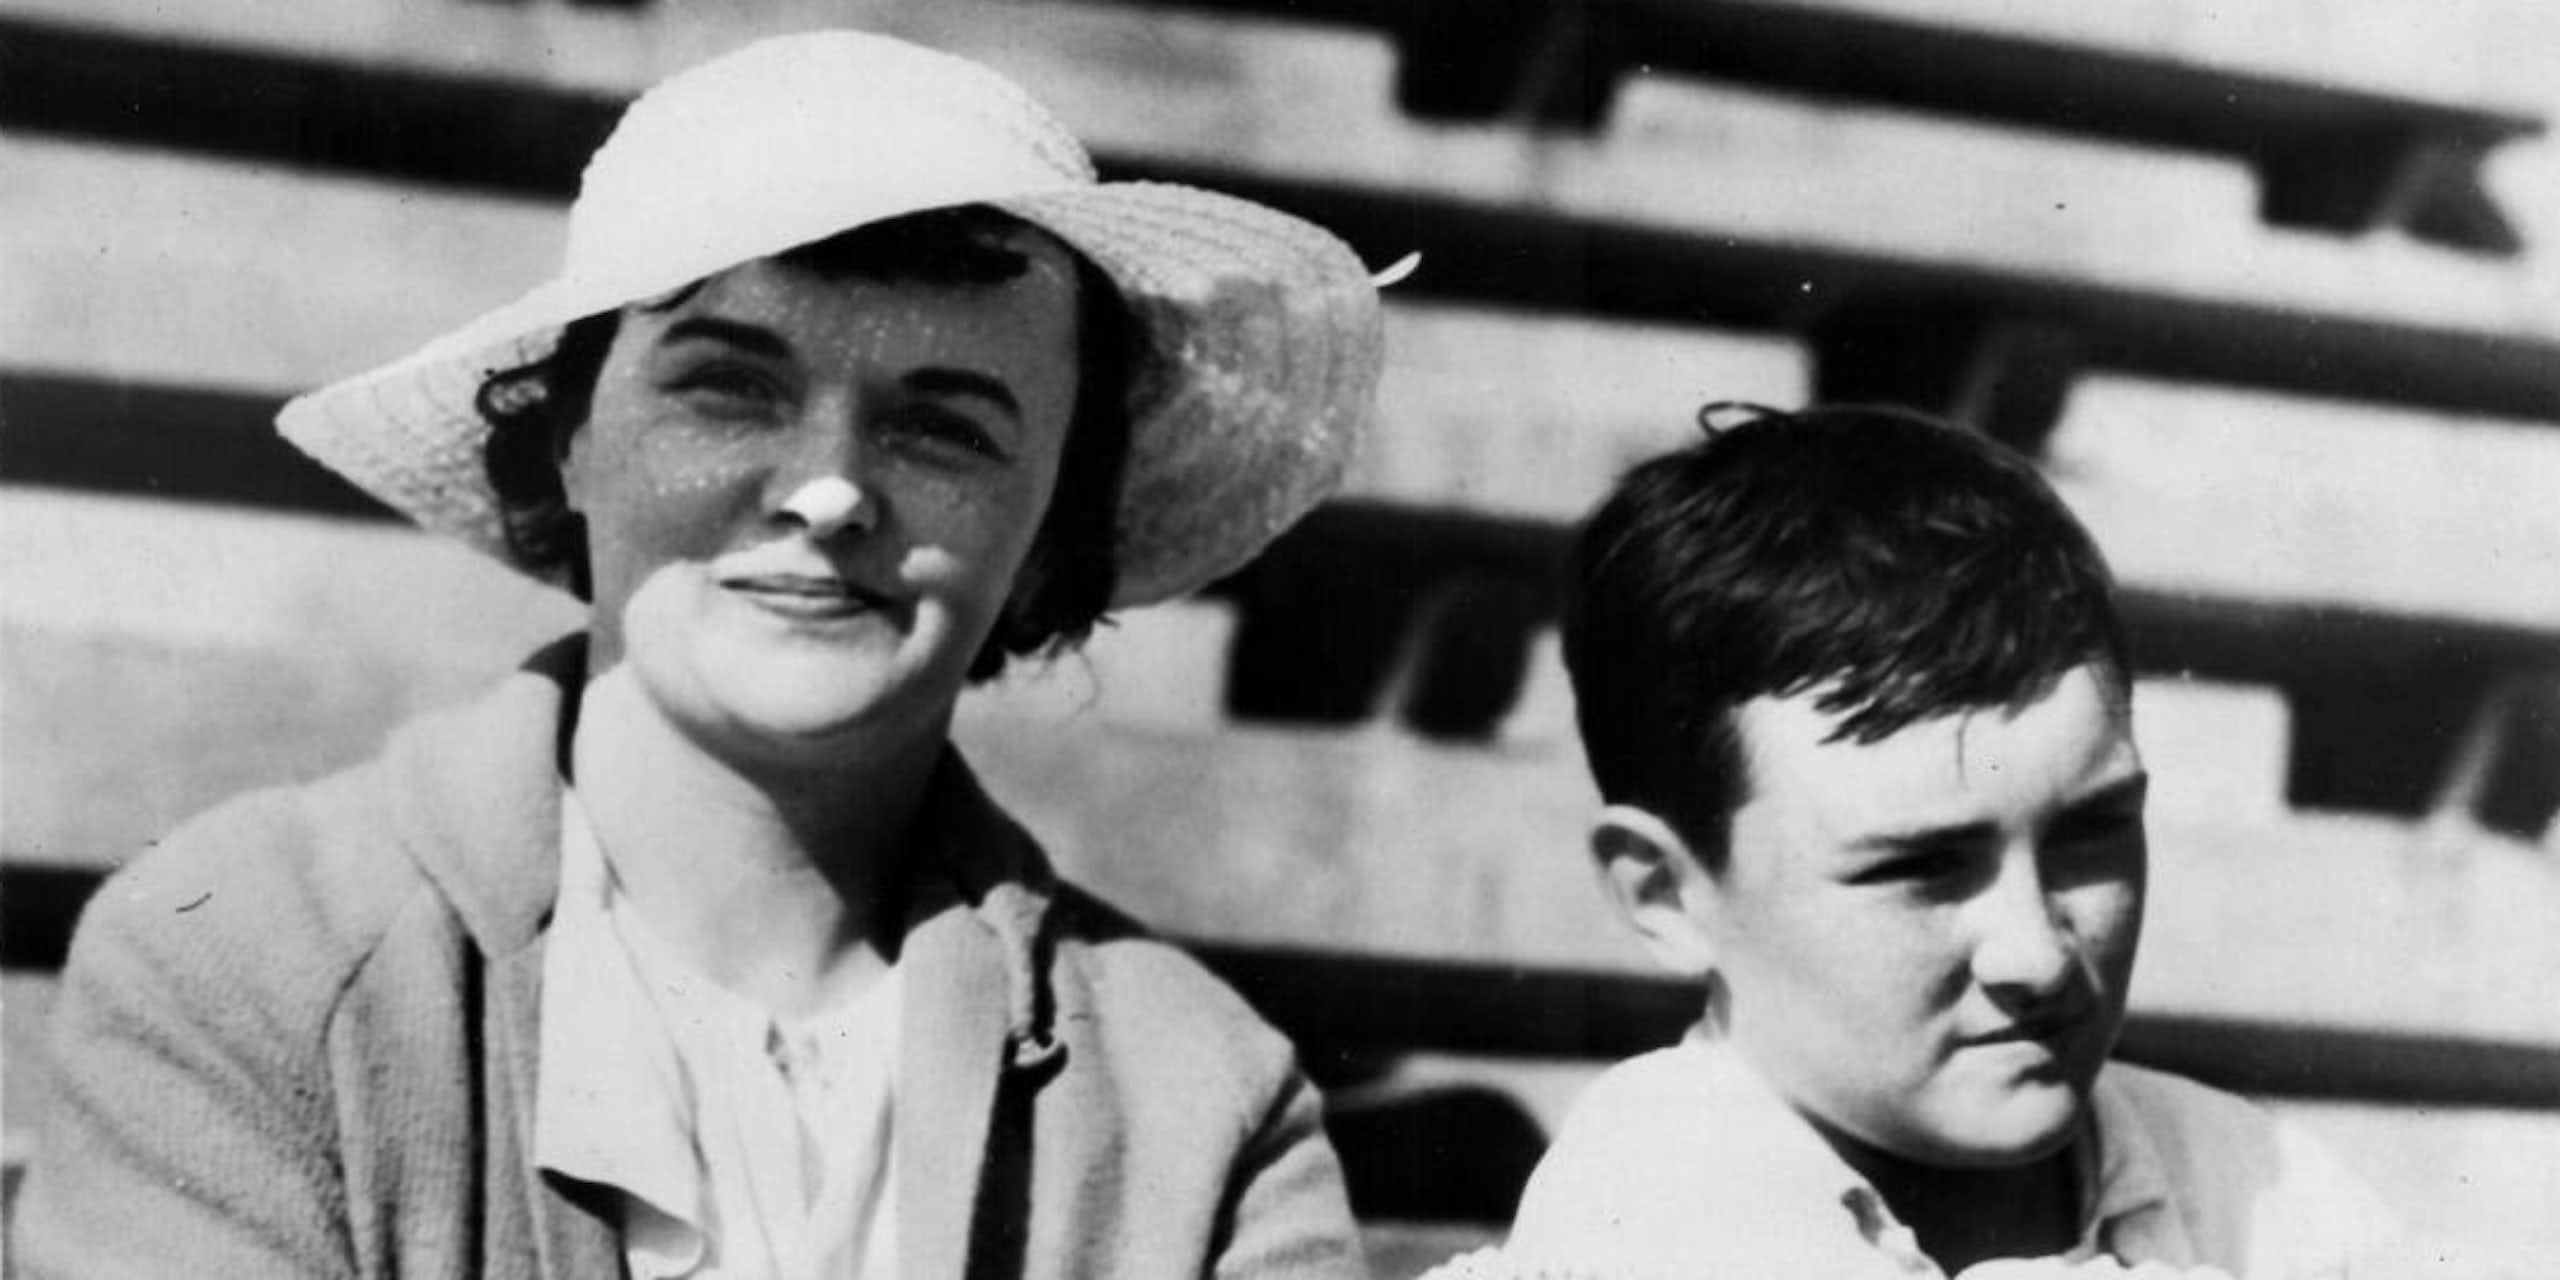 Black and white photo of woman wearing hat posing with boy in bleachers.